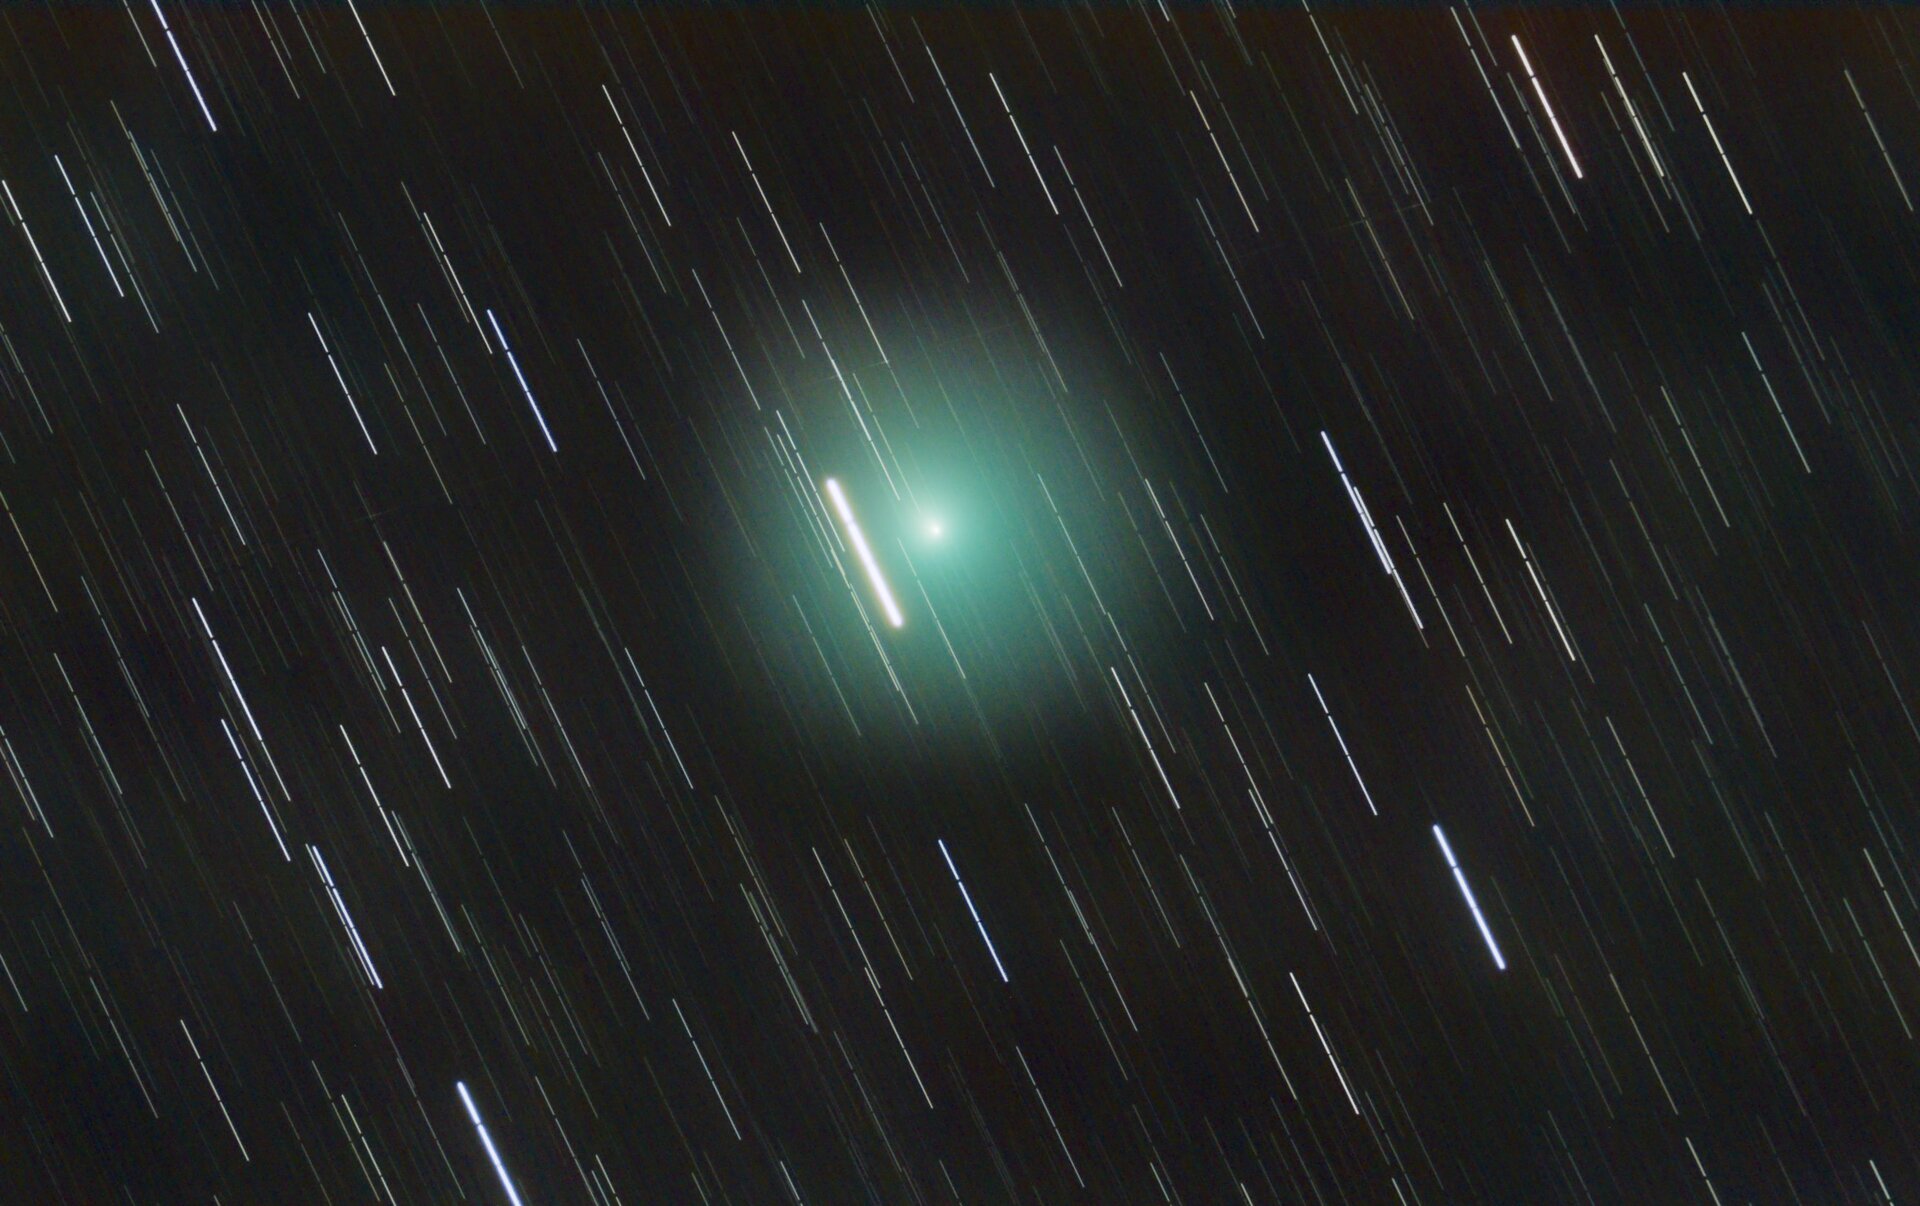 Comet 46P/Wirtanen from Madrid